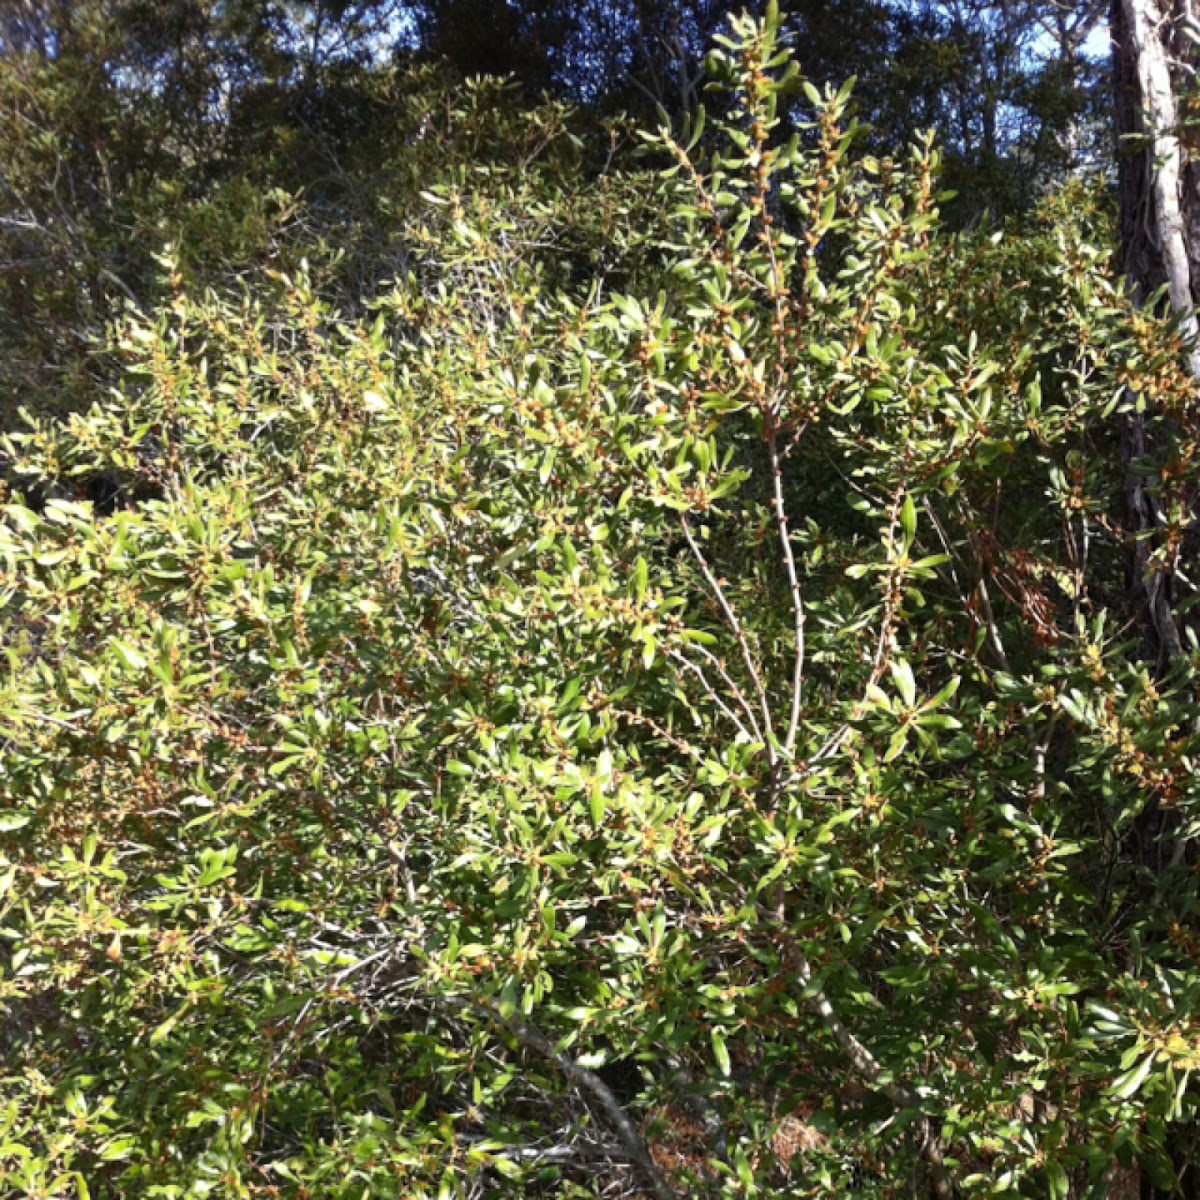 Bayberry or wax myrtle